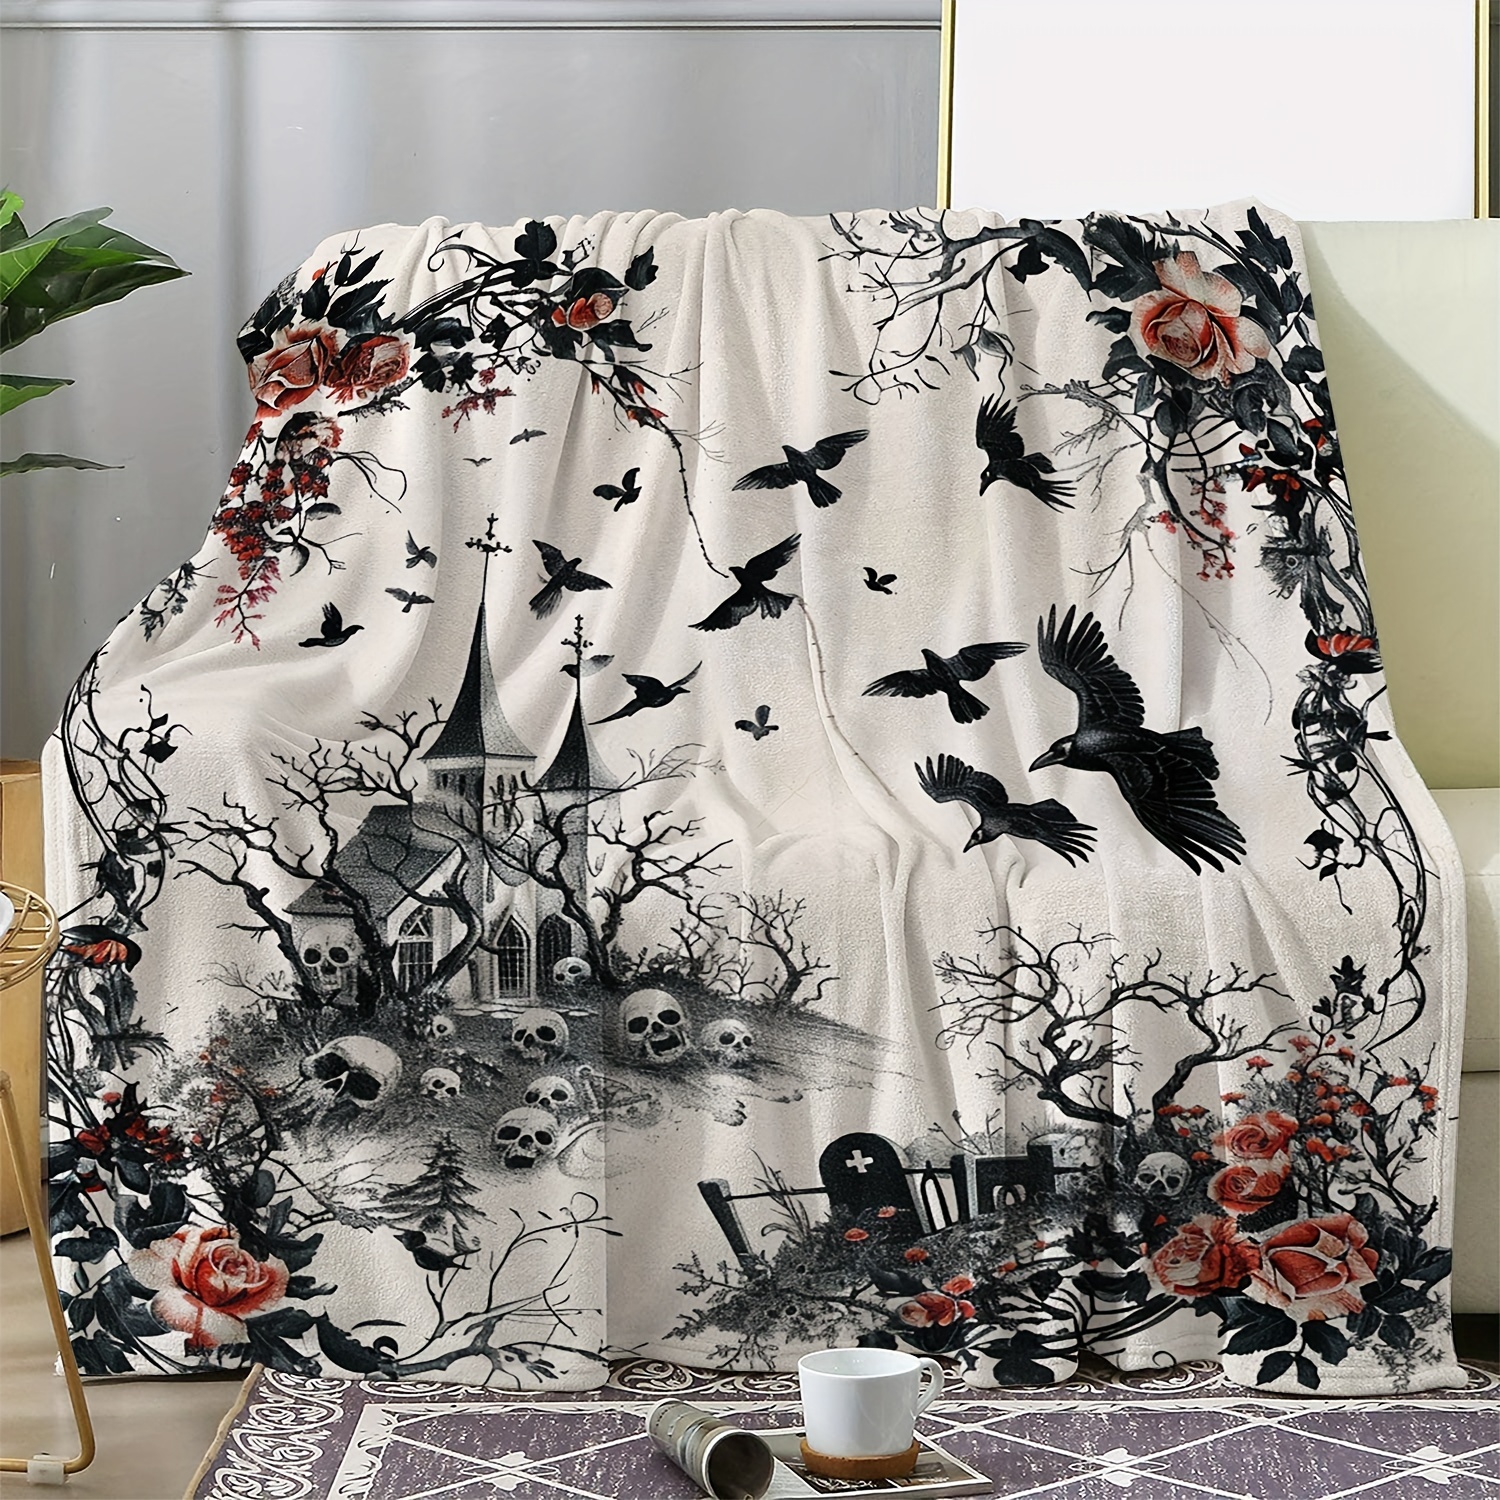 

Vintage Halloween Flannel Throw Blanket - Cozy & Soft With Castle, , Crow & Rose Design | Perfect For Couch, Bed, Car, Office, Camping | All-season Gift Idea